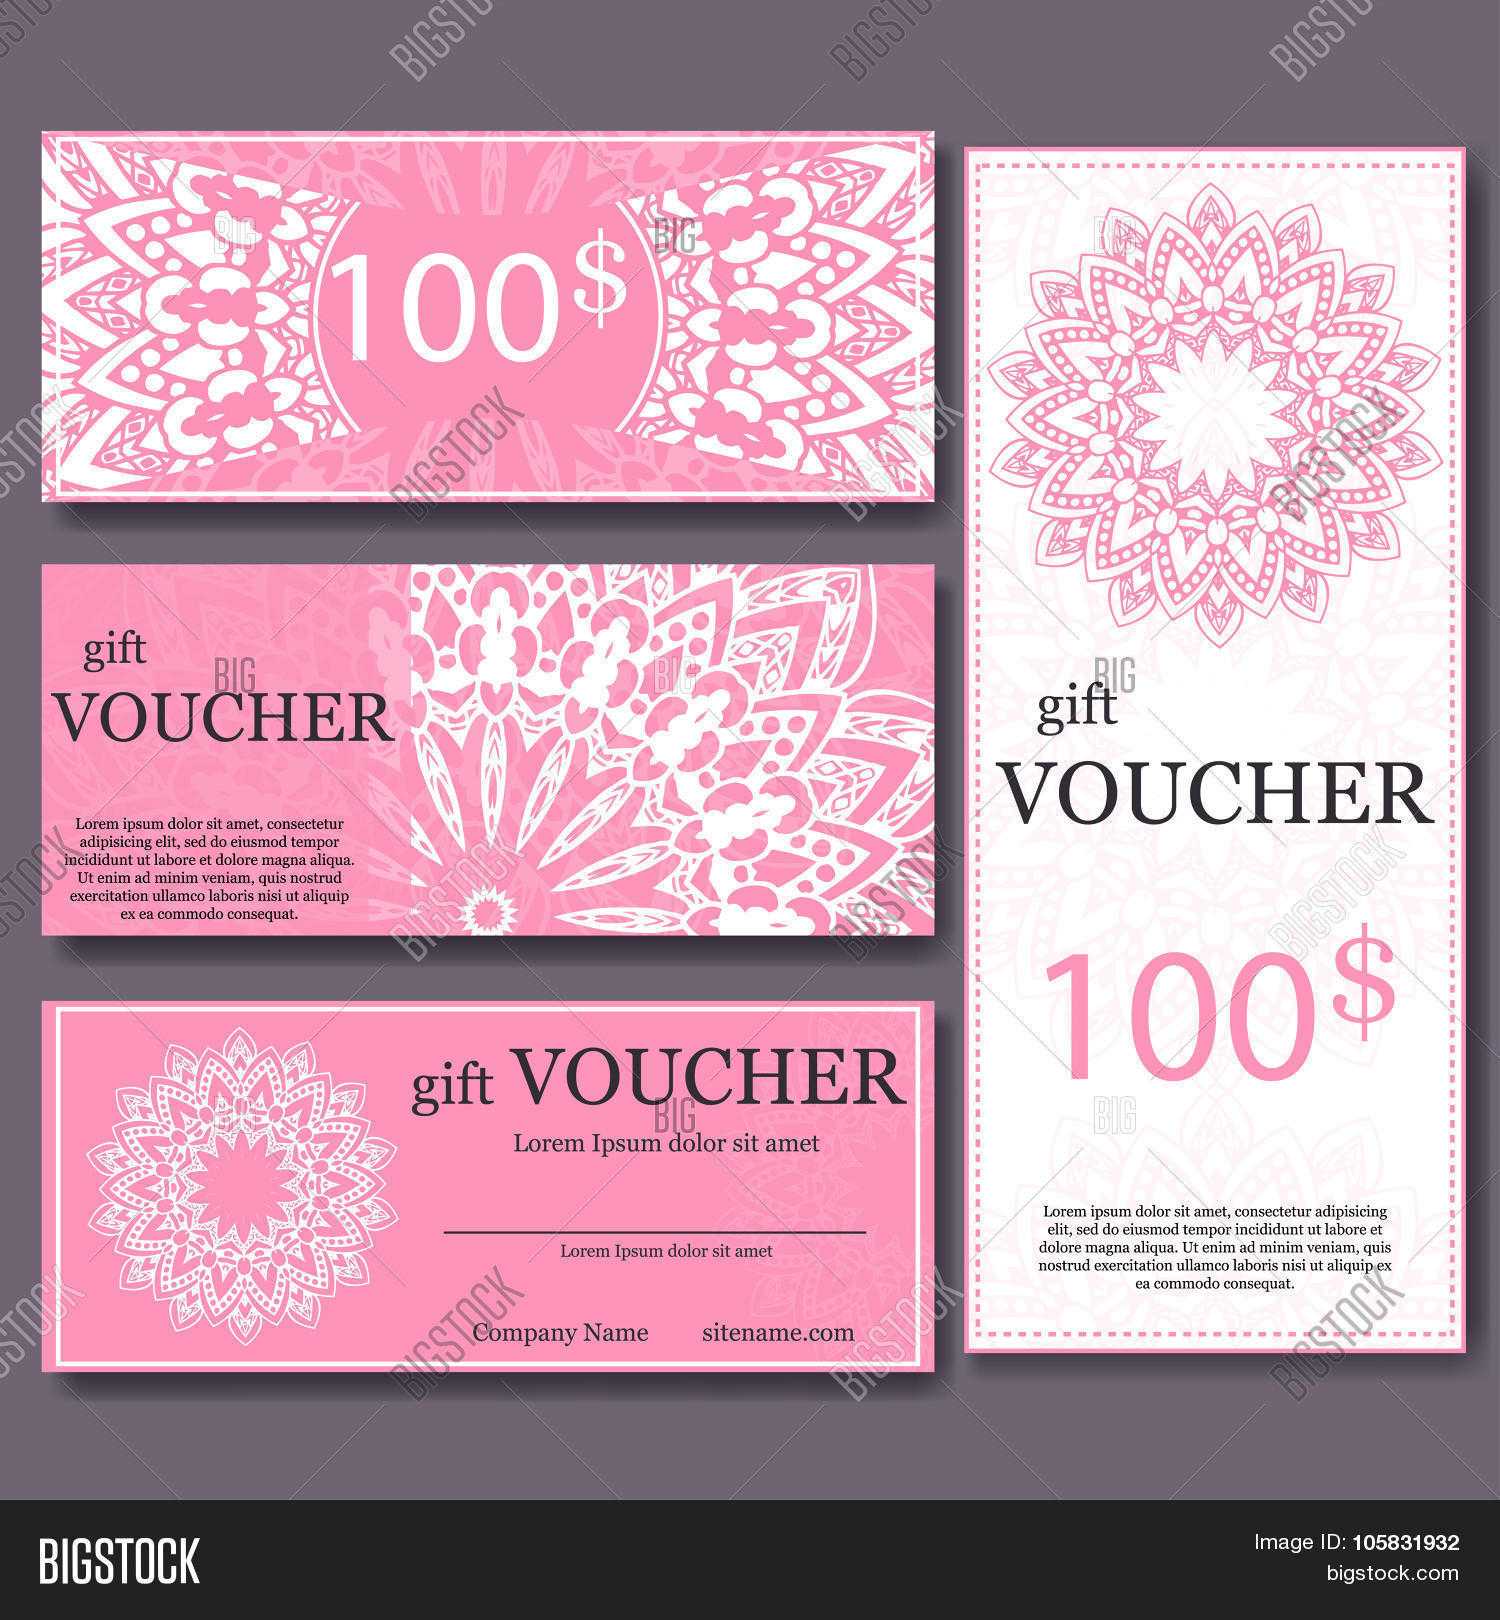 Gift Voucher Template Vector & Photo (Free Trial) | Bigstock Inside Magazine Subscription Gift Certificate Template